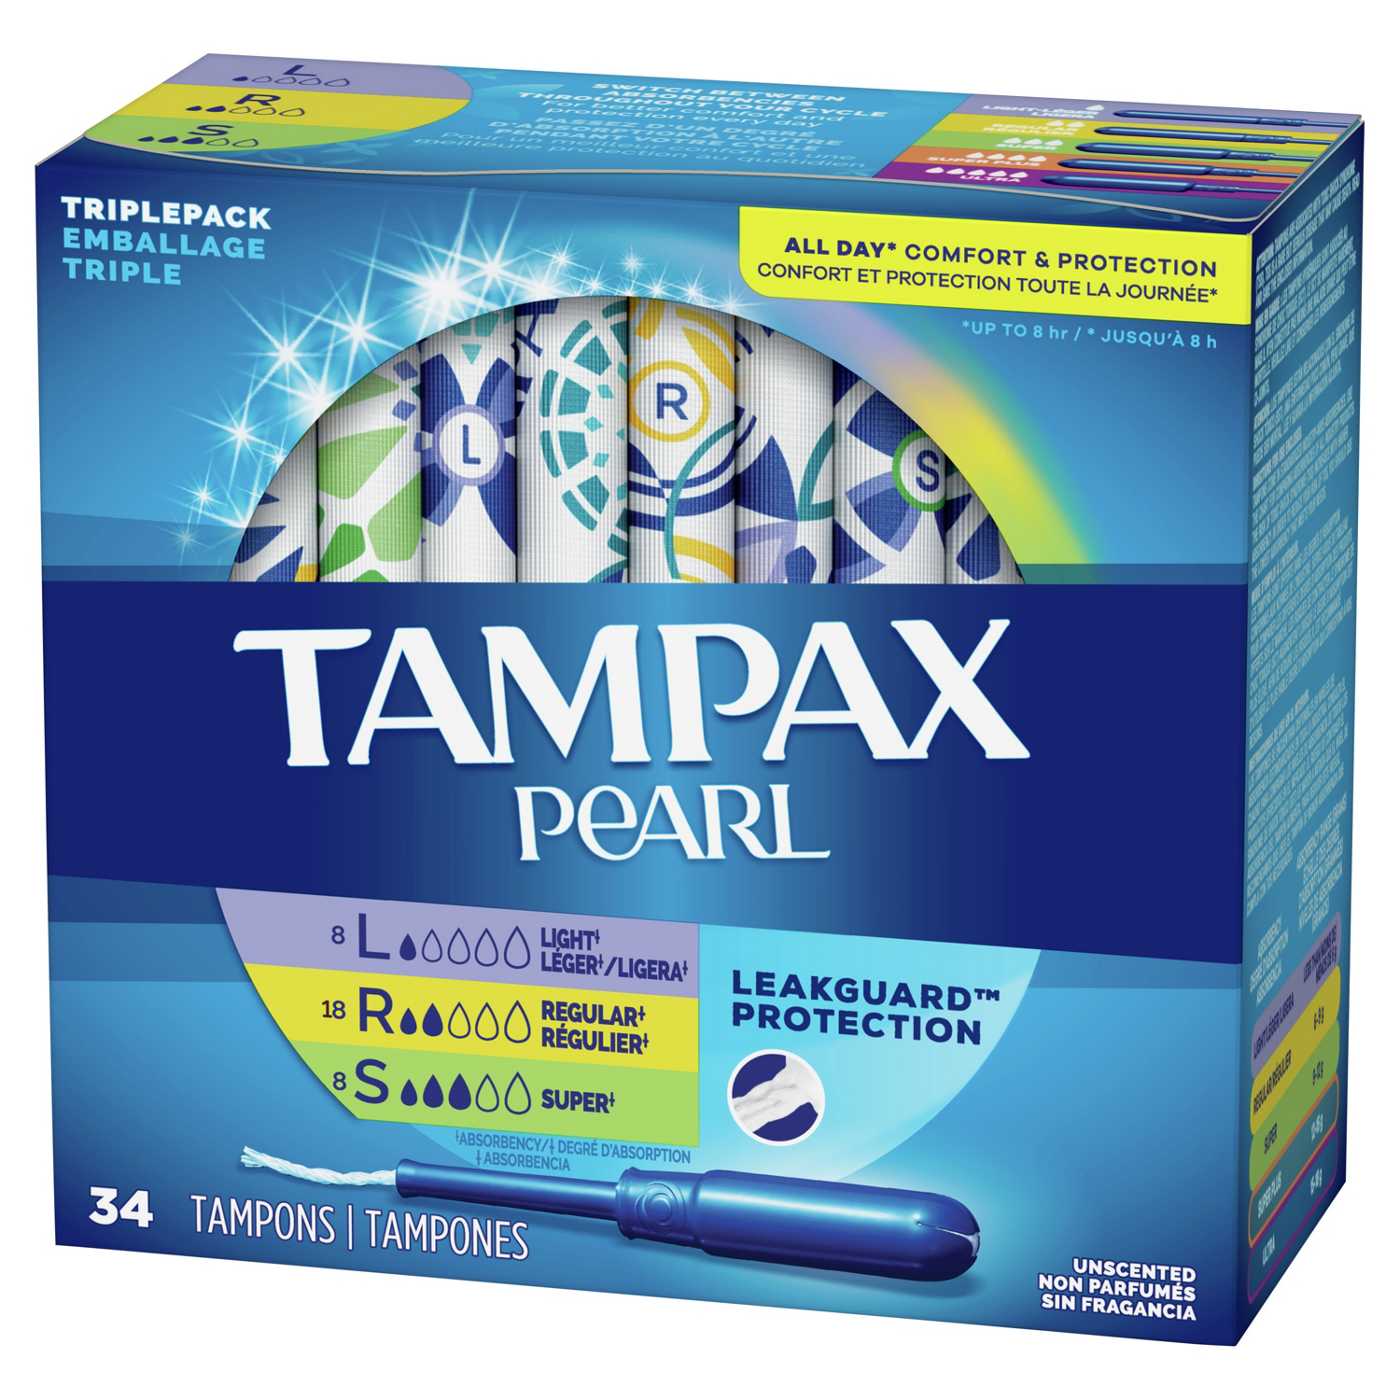 Tampax Pearl Tampons Trio Pack, Light/Regular/Super Unscented; image 5 of 5